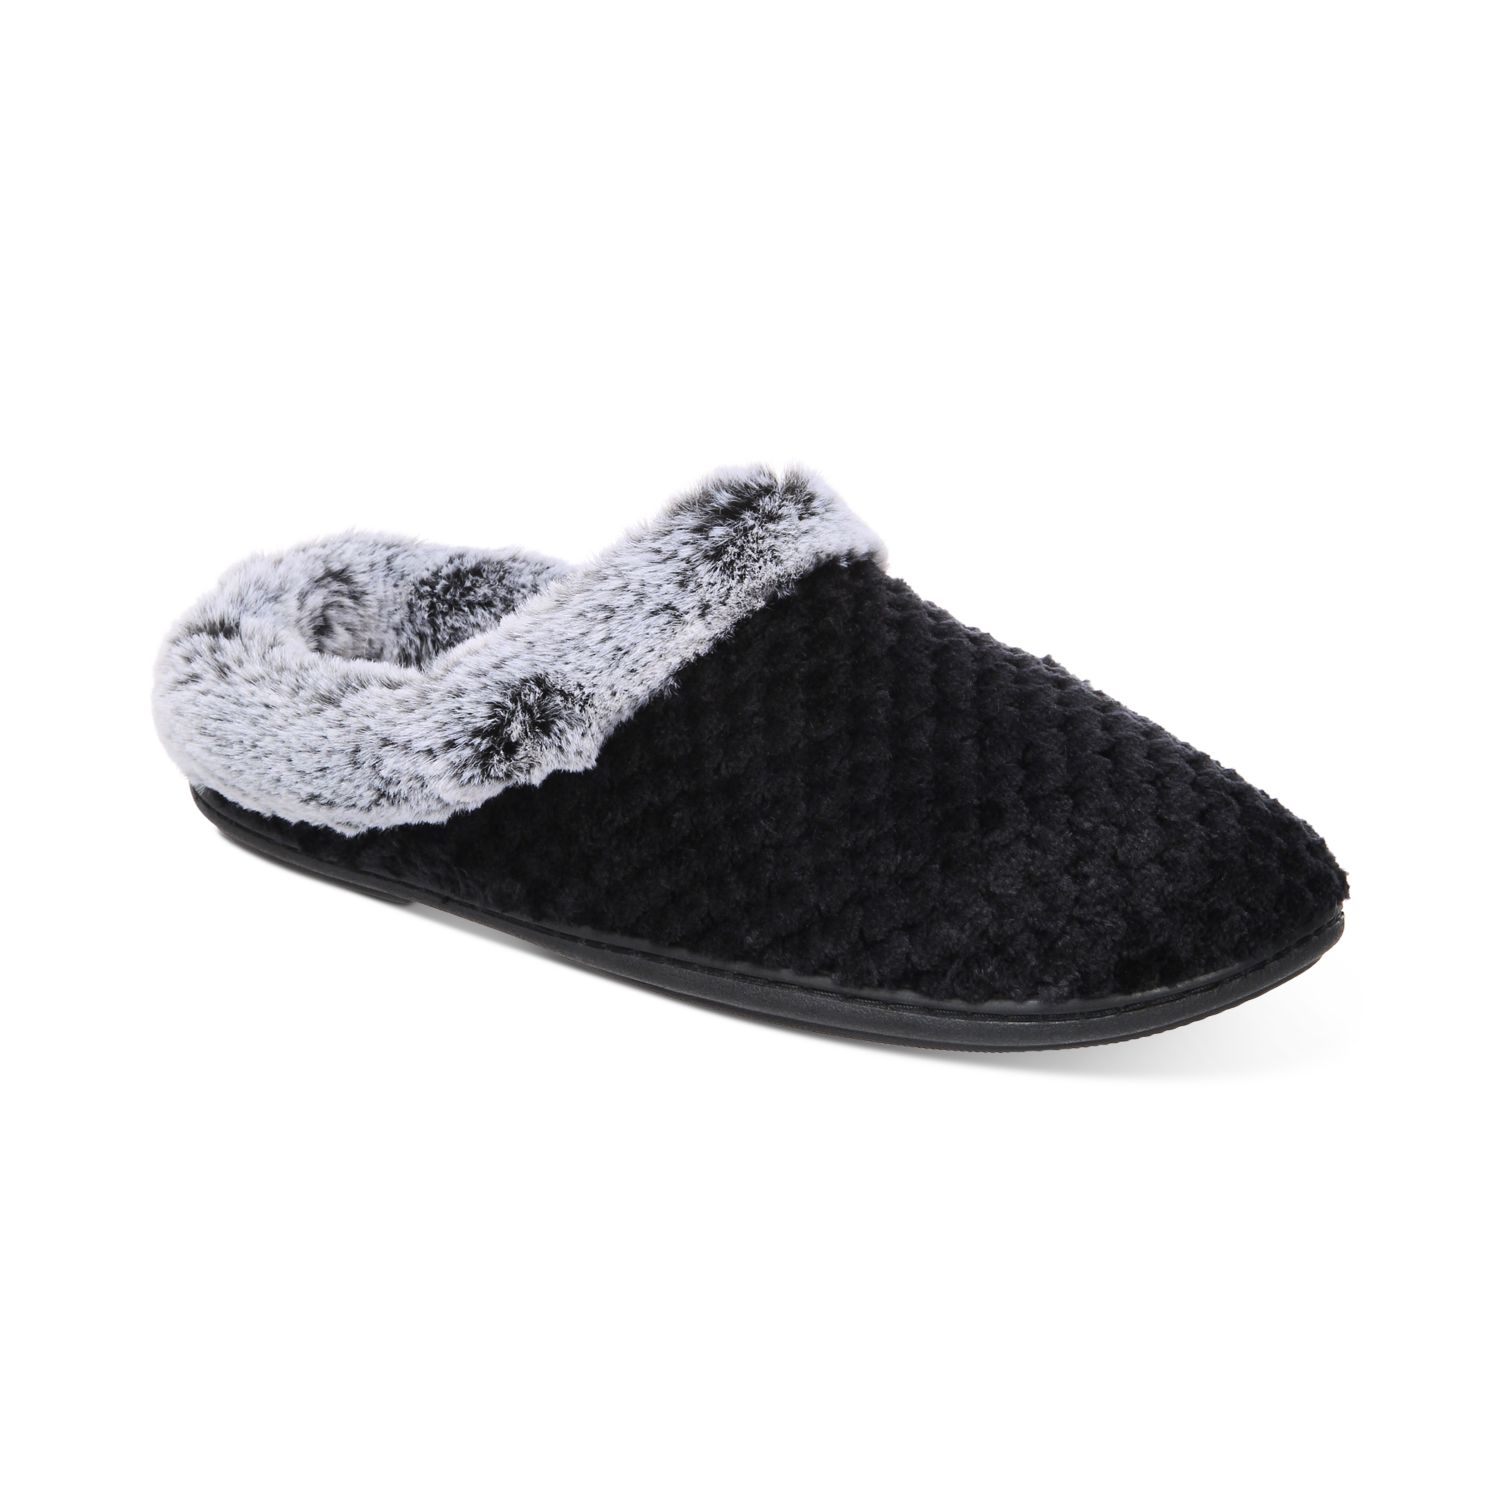 Isotoner Signature Women's Slippers (various) $10 + Free Ship to Store at Macys or free ship on $25